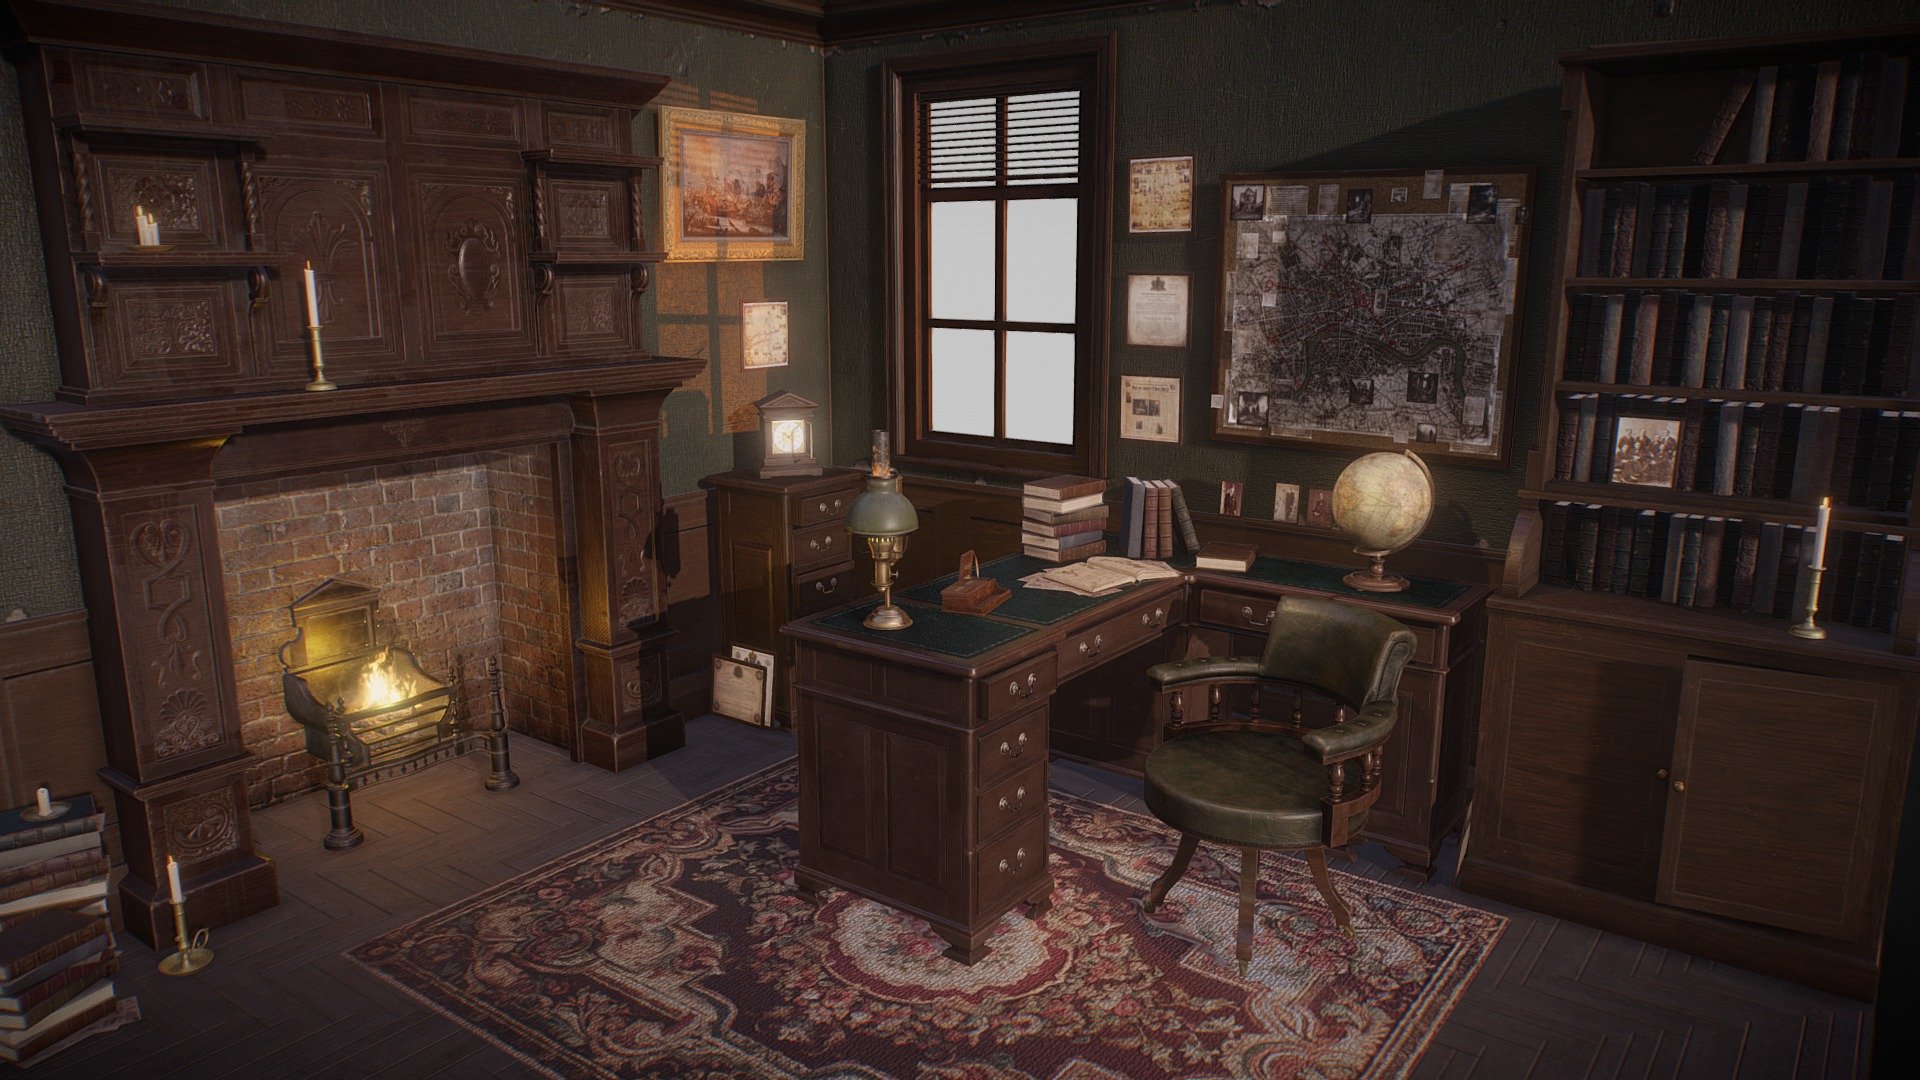 A Victorian study room that includes a collection of game-ready assets. The overall theme is a private detective room for a personal project, but the assets are suitable for many themes and genres.

This sanctuary belongs to a private detective. Amid the crackle of the fire and the room's shadowed corners, she delves into mysteries, her scattered notes, books, and sketches revealing a world of silent secrets.

Features




Collection includes over 40 unique game-ready models, including a desk, fireplace, bookcase, cabinets, paintings, candle holders, books, and props.

Models are low-poly and optimised for use in game, VR, archviz, and visual production.

Clean topology. Objects are grouped, named appropriately and unwrapped.

Modelled in Blender and textured in Substance Painter.

97,255 total triangles; 54,569 total vertices.

Textures

14 PBR texture sets. Textures are in .png up to 2048x2048 and include: Base Colour, Metallic, Roughness, Normal, Alpha, Emissive - Victorian Room - Buy Royalty Free 3D model by Matthew Collings (@mtcollings) 3d model